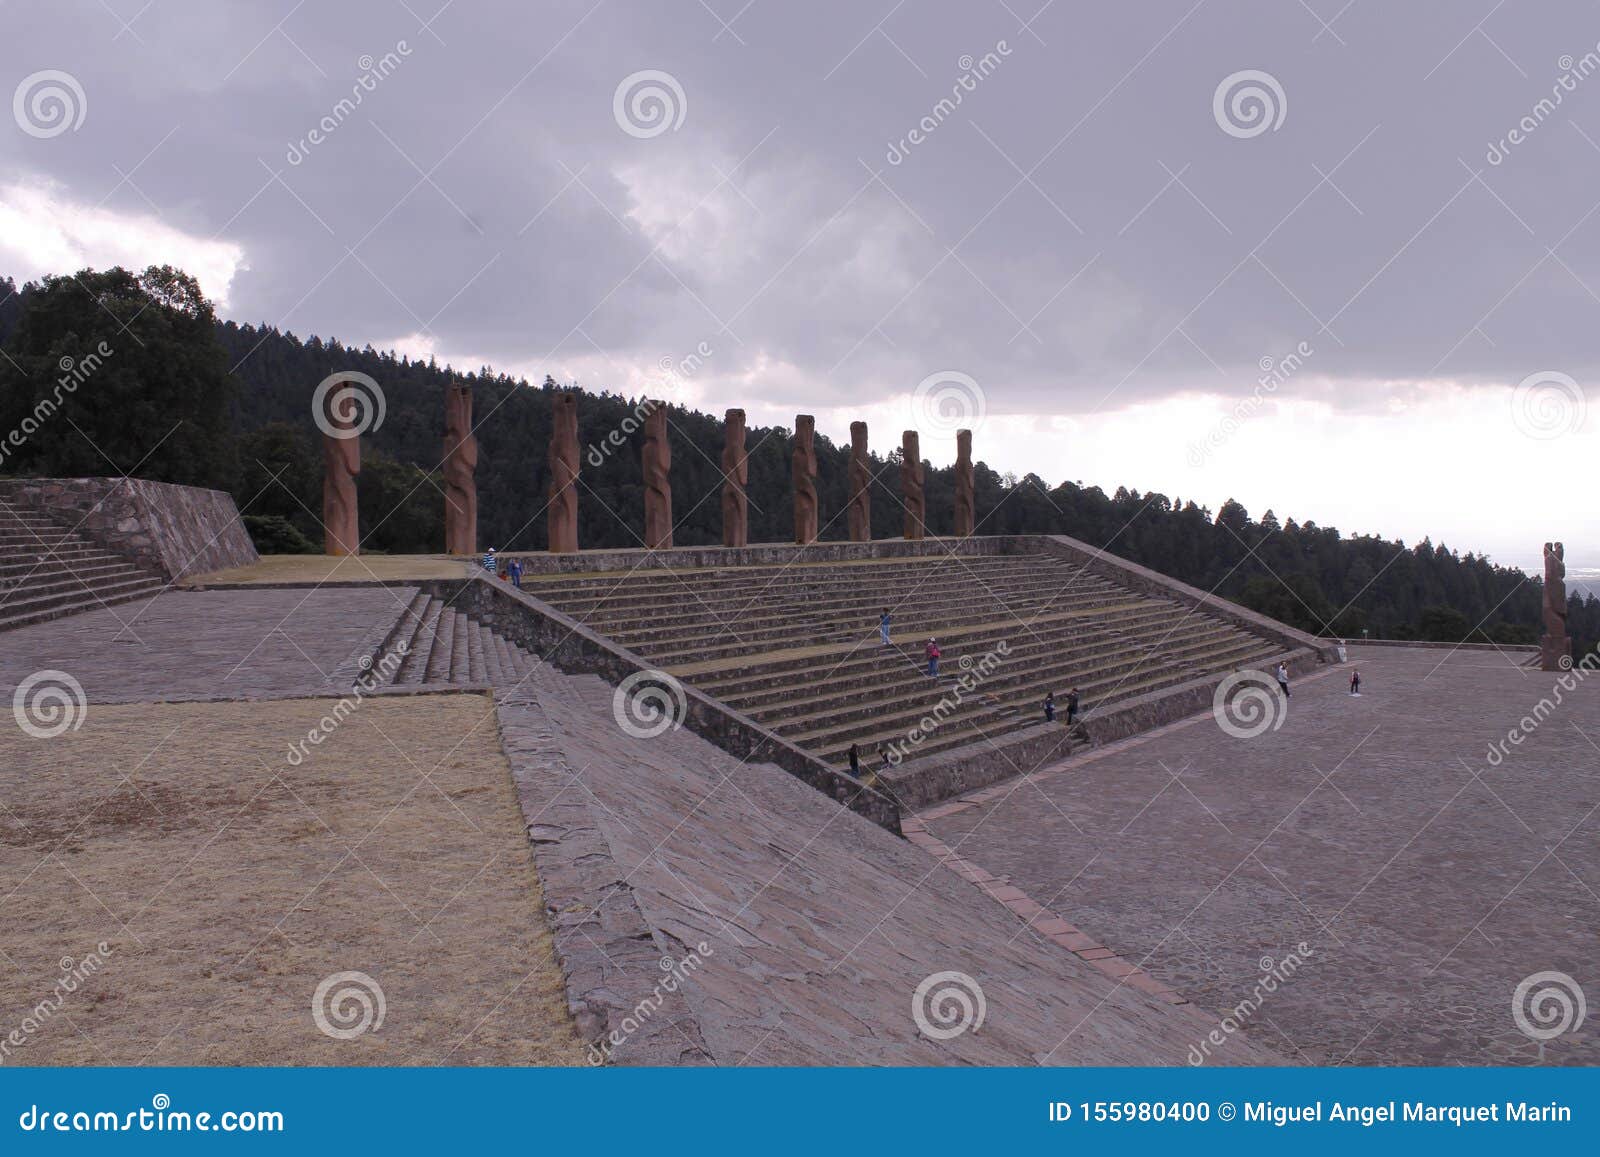 monuments at the top of the stairs, centro ceremonial otomi in estado de mexico. side view